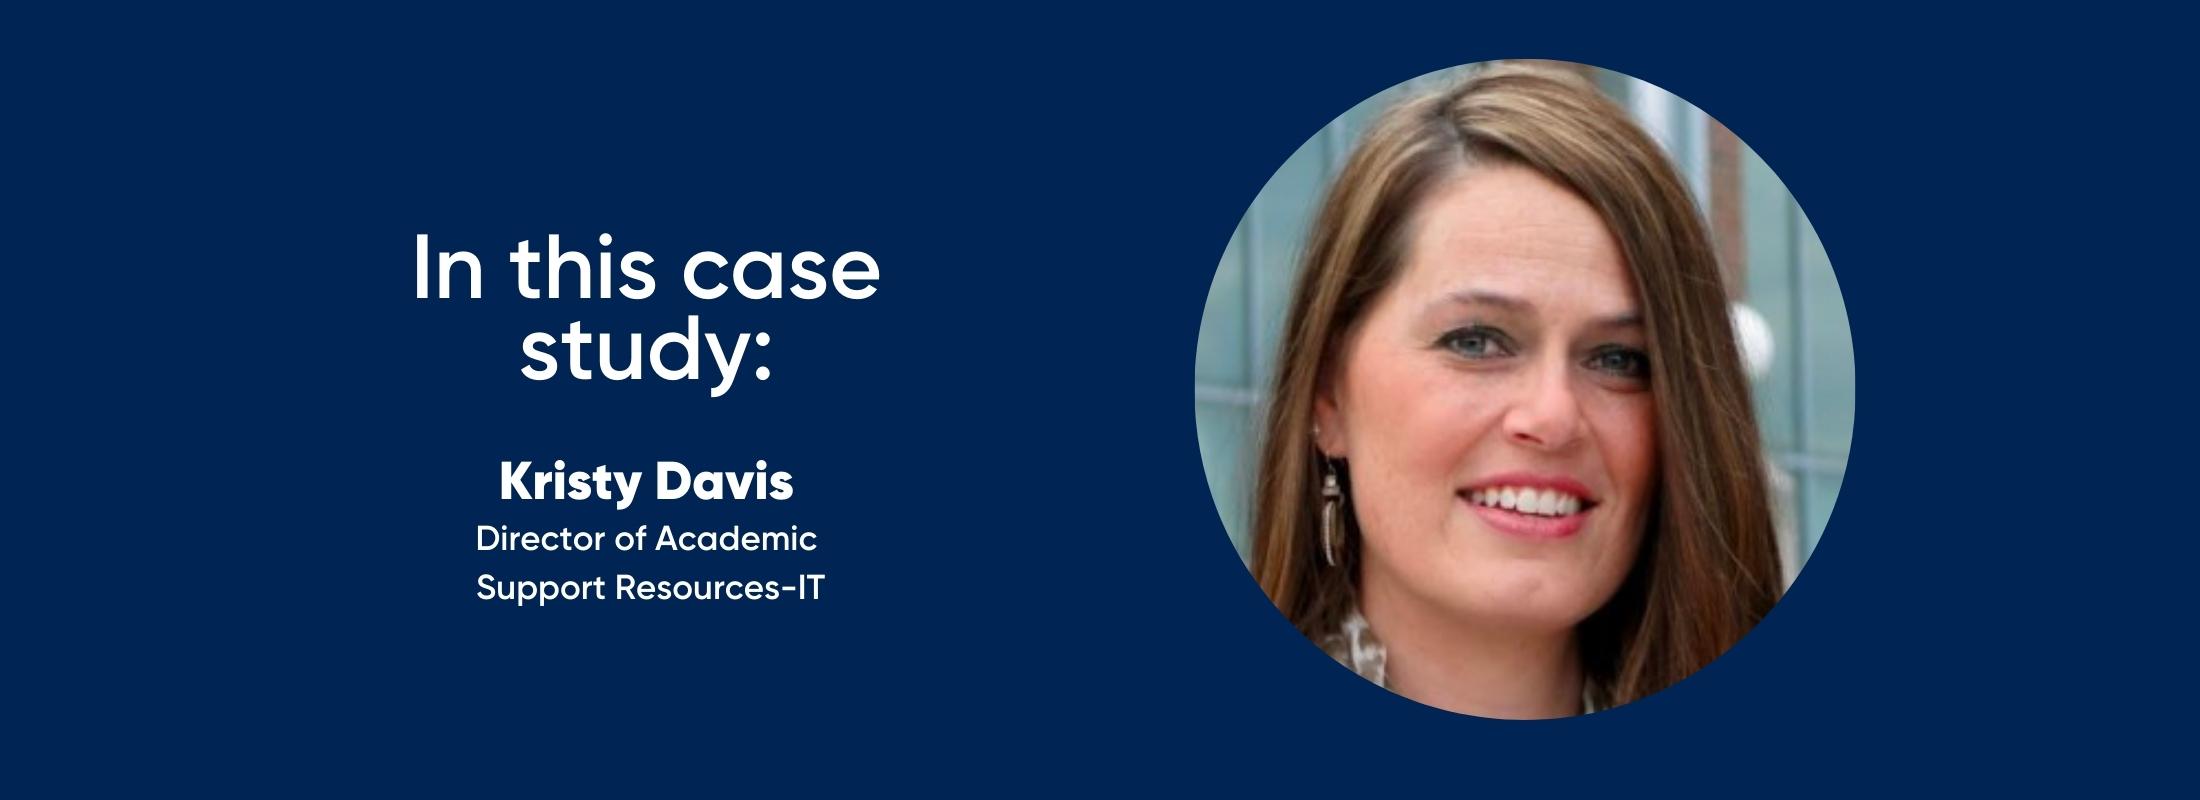 in this case study: Kristy Davis—Director of Academic Support Resources-IT